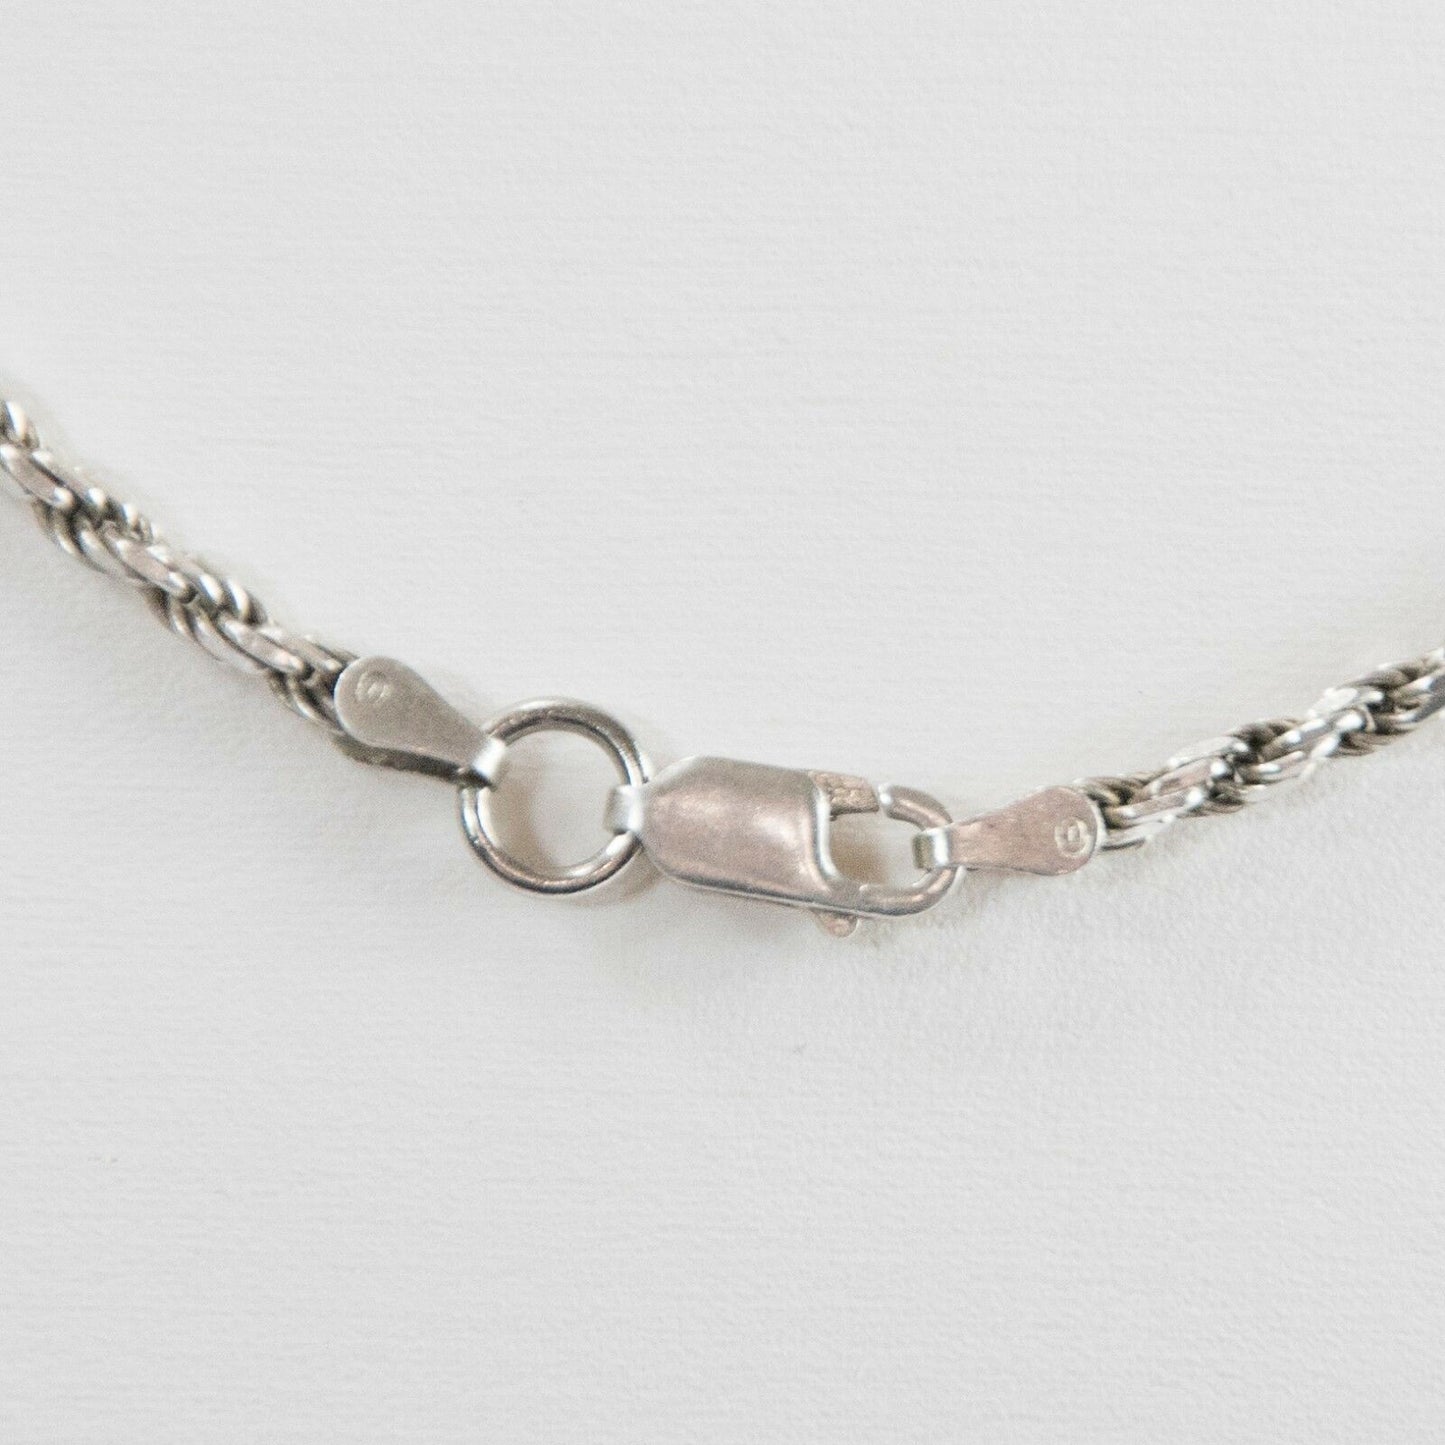 Made in Italy Italian 925 Sterling Silver 18 Inch Rope Chain Necklace